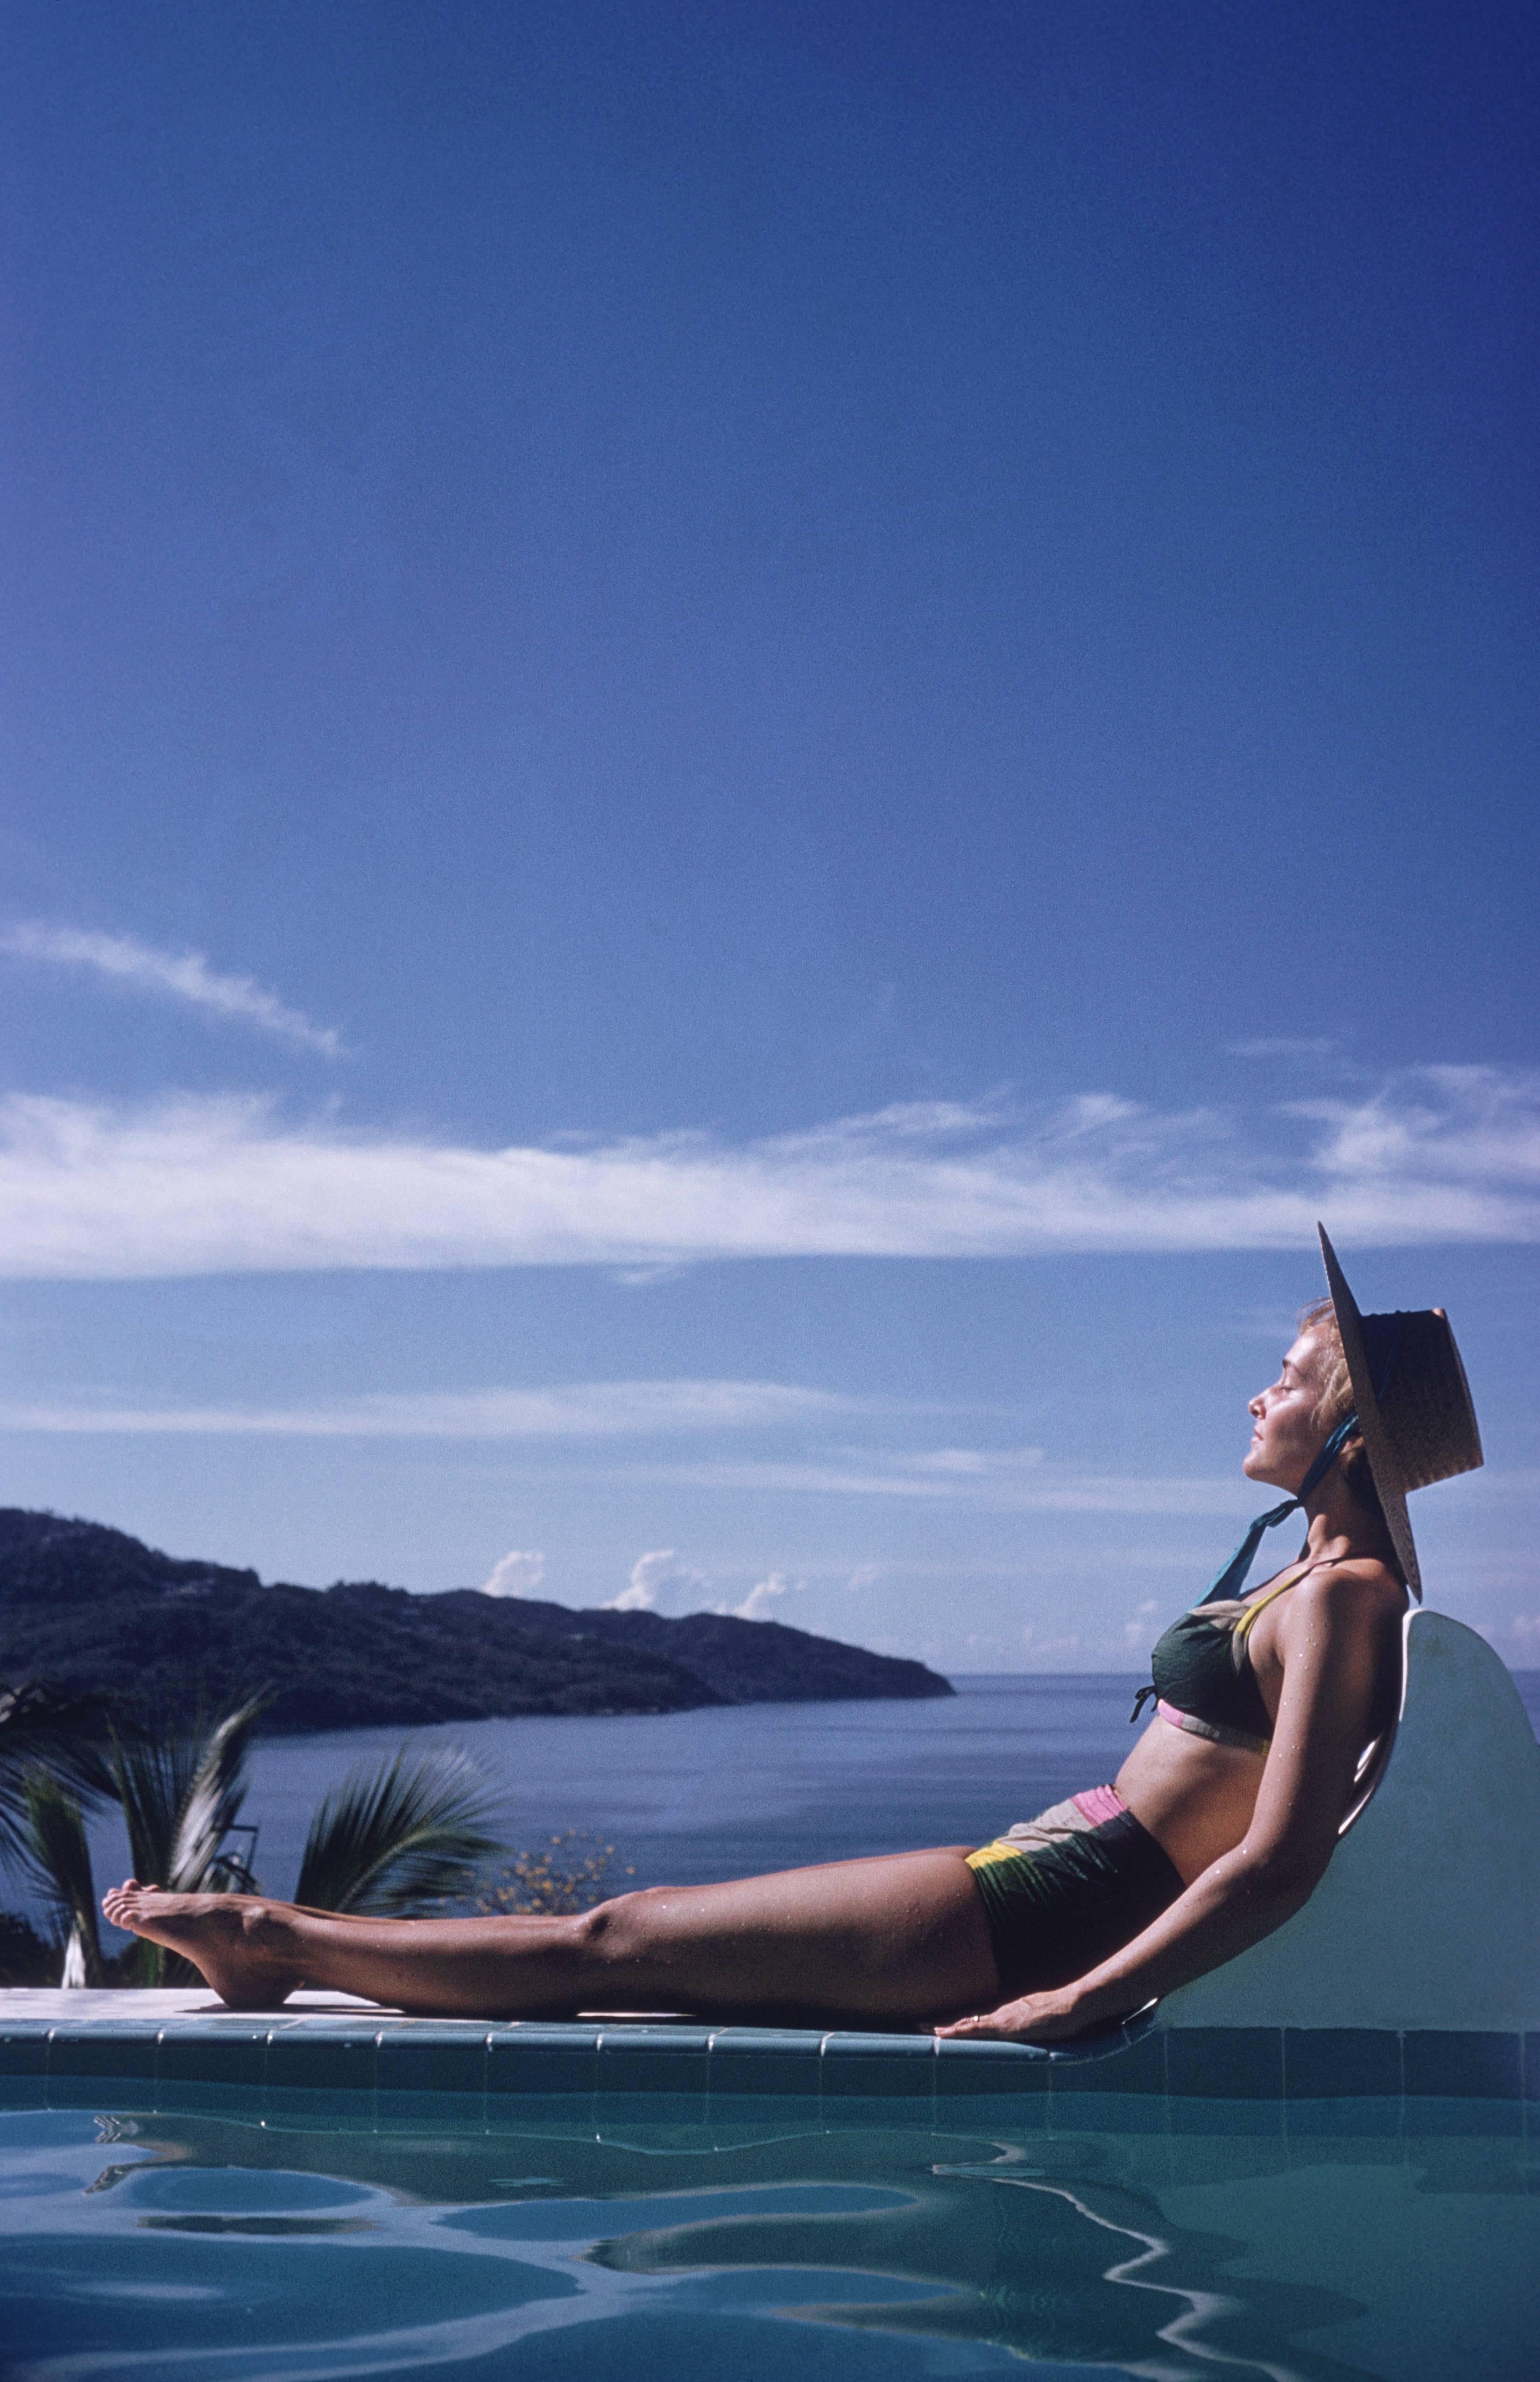 Ingrid Morath sunbathes by a swimming pool next to the sea in Acapulco, January 1961. Ingrid was born in Rio de Janeiro and lives in Mexico City. (Photo by Slim Aarons/Getty Images)

C-type print from the original transparency held at the Getty